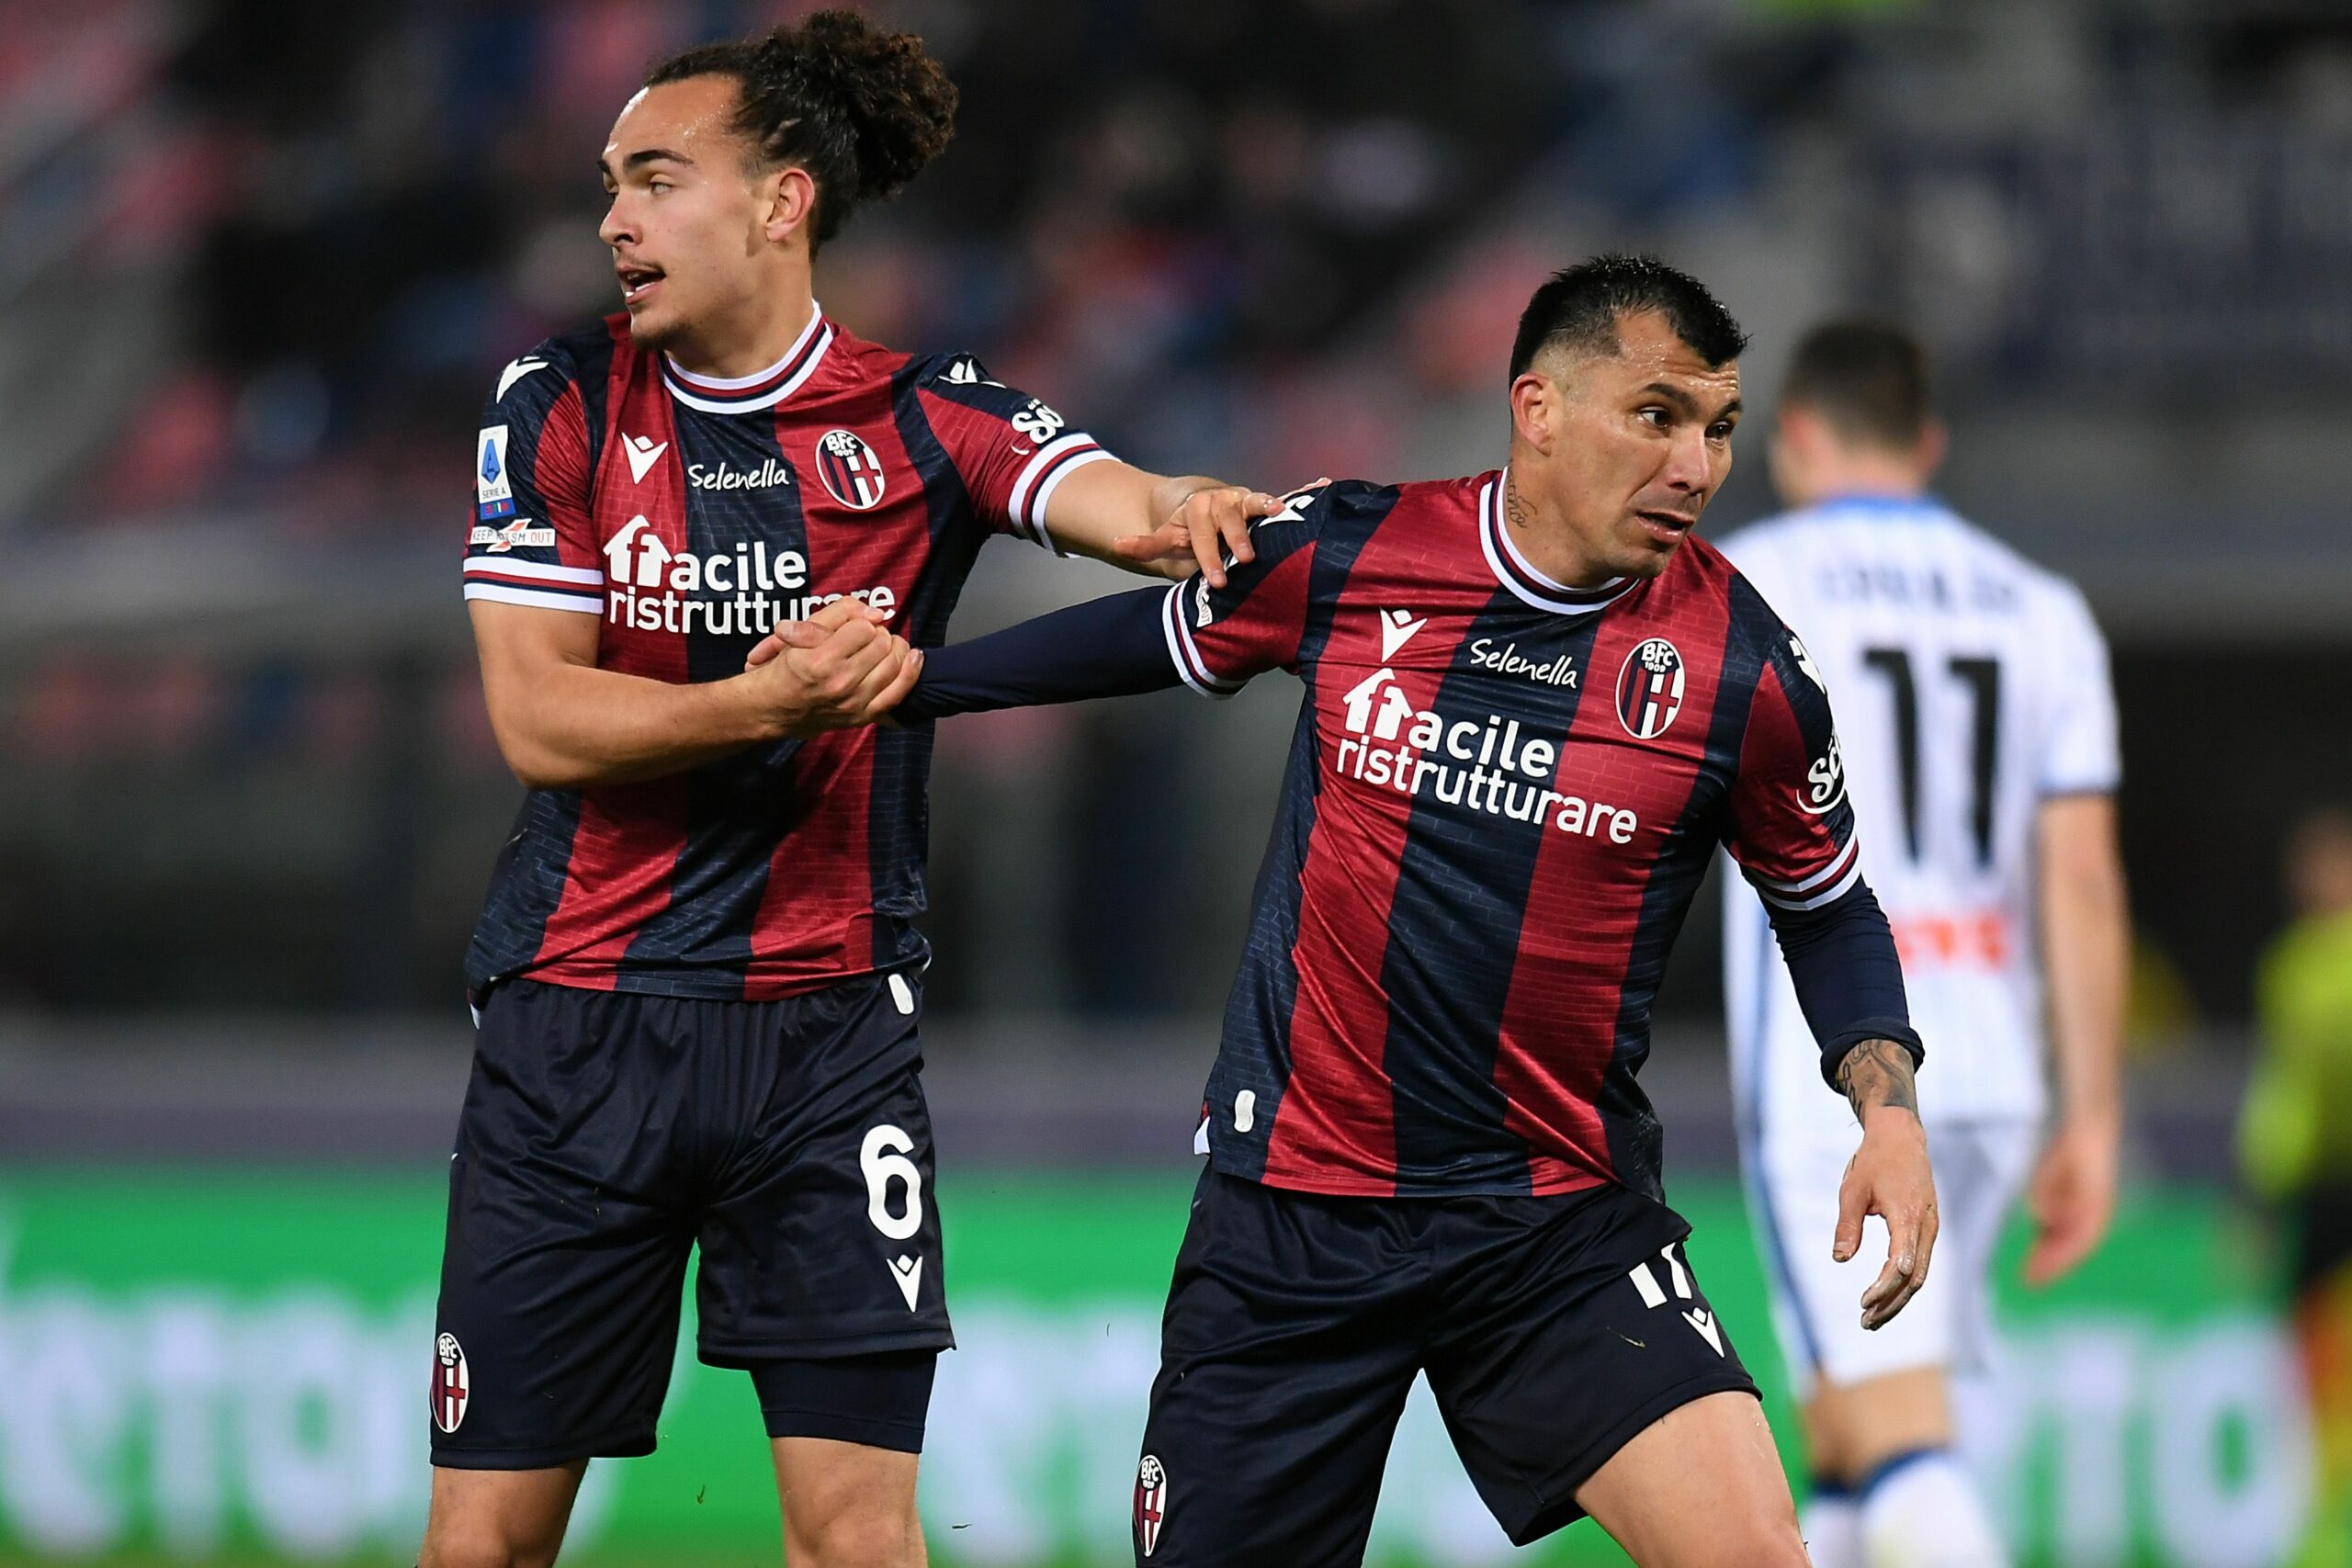 BOLOGNA, ITALY - MARCH 20: Arthur Theate of Bologna FC helps Gary Medel of Bologna FC during the Serie A match between Bologna FC and Atalanta BC at Stadio Renato Dall'Ara on March 20, 2022 in Bologna, Italy. (Photo by Alessandro Sabattini/Getty Images)